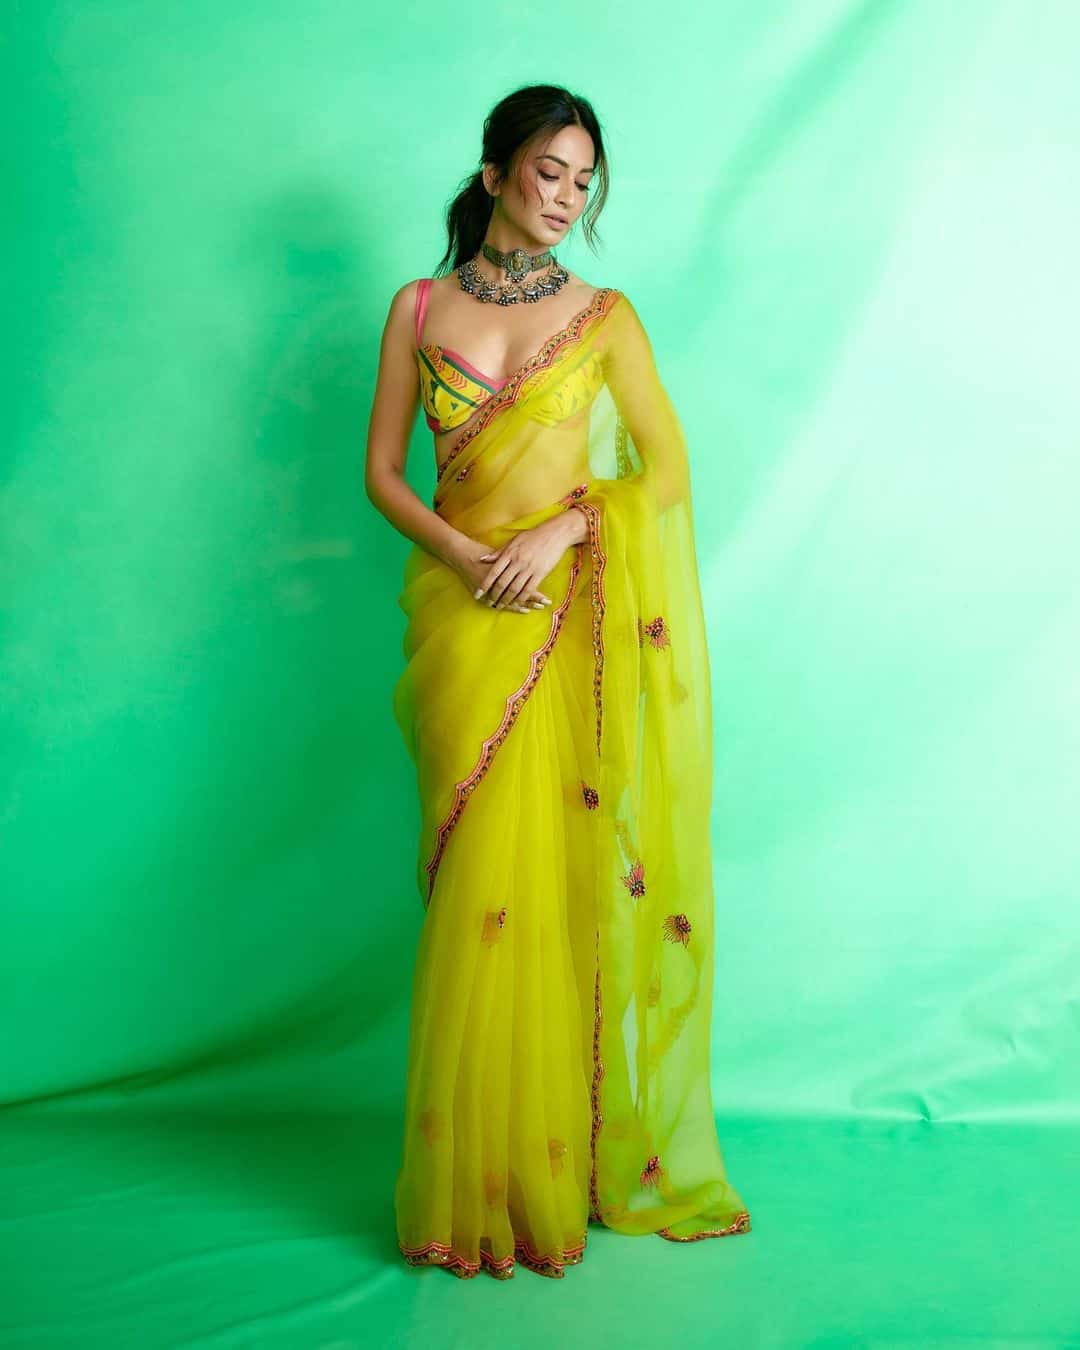 Kriti Kharbanda In Saree 5 Times The Actress Aced Ethnic Fashion With Traditional Elegance